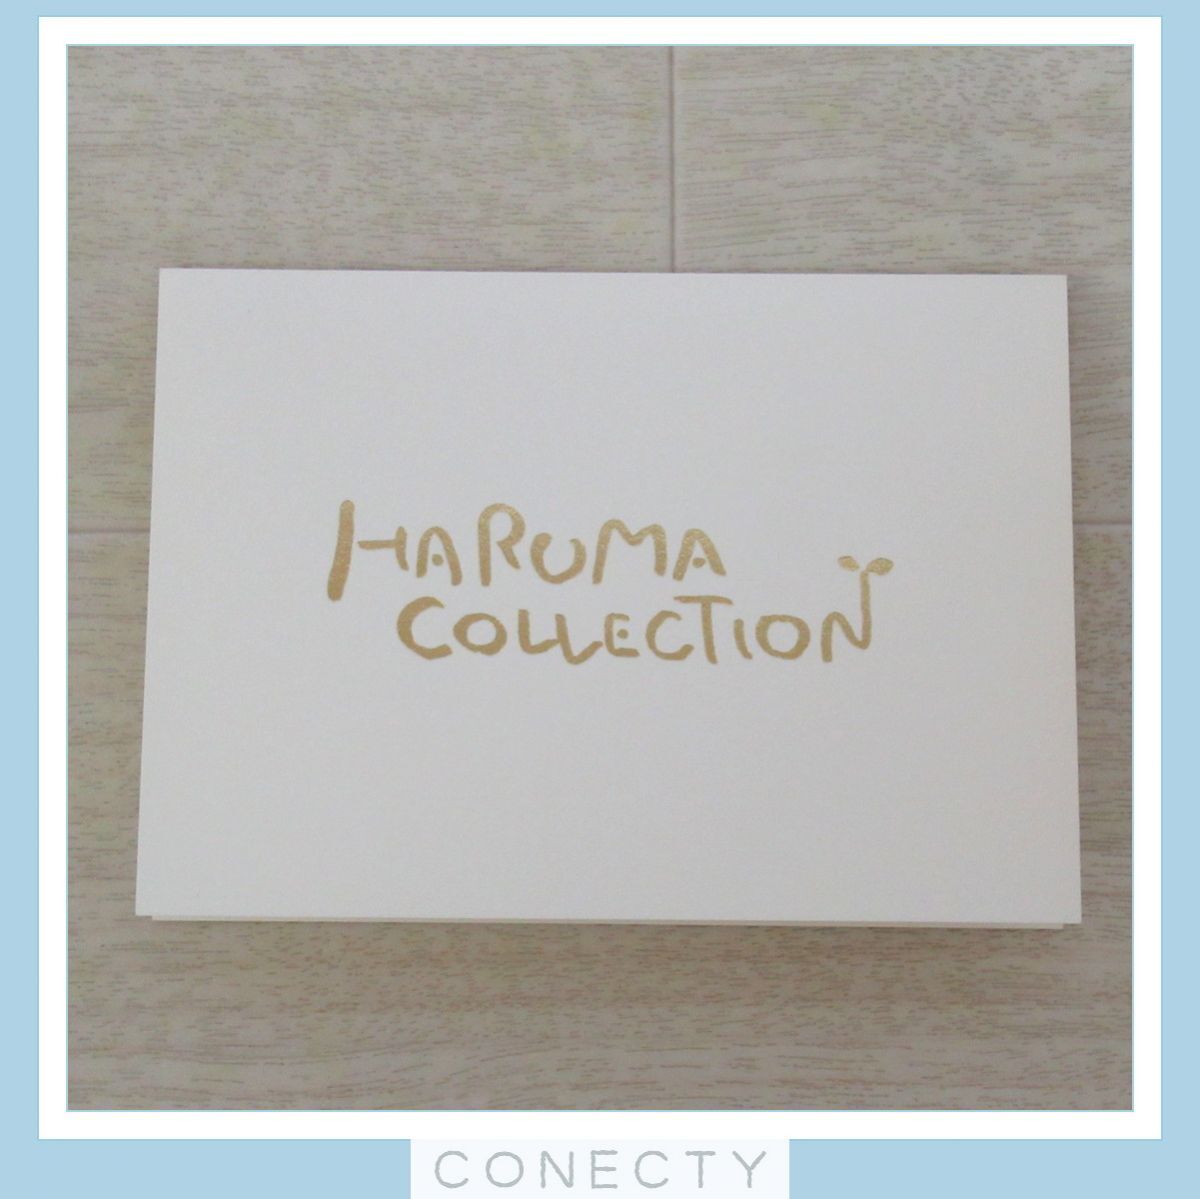  three . spring horse 20th Hal kore message card Hal ma collection /HARUMA COLLECTION/ two 10 -years old birthday Event [K4[SP